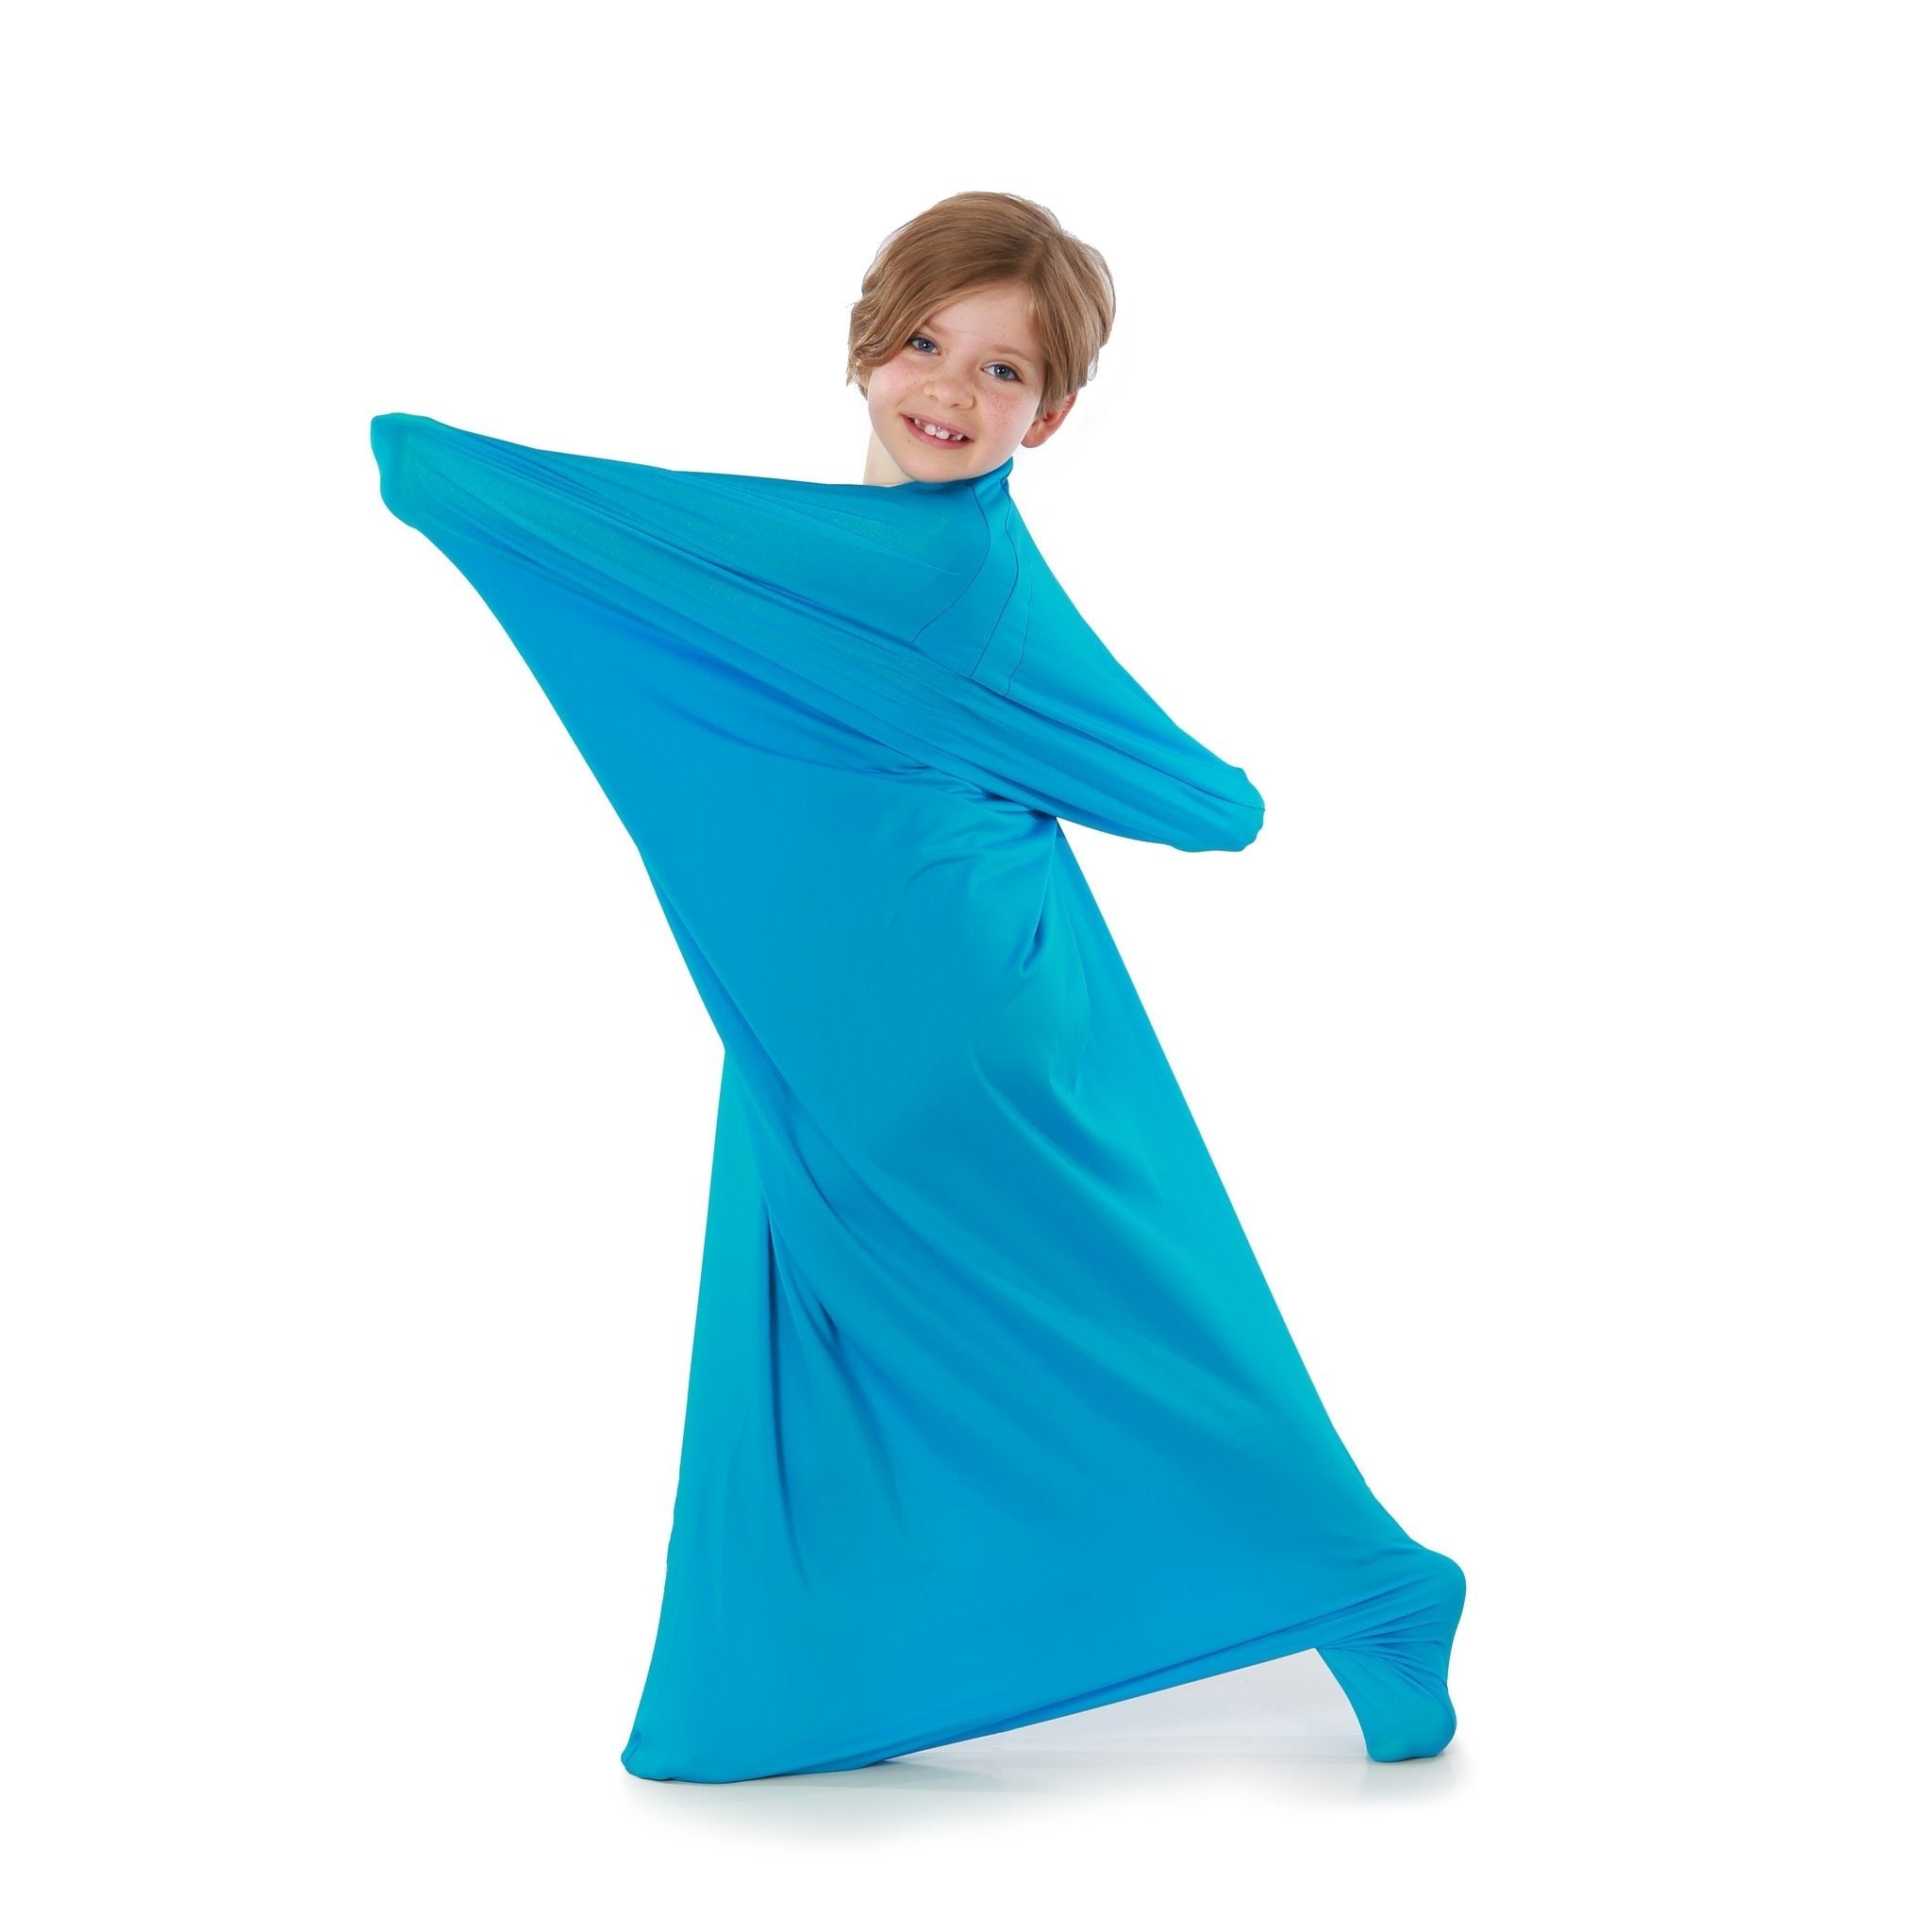 Body Sox, The Sensory Body Sock is an exciting experience full of fun and laughter and with great sensory input. The Body Sock teaches spatial language with reinforced tactile information from the Lycra. "Tall", "wide", "tiny" start to have more meaning when the child feels the shape they make. Many children with autism will enjoy the feel of the lycra squeezing against their body, but allow them to explore the Body sox first and ensure they actively choose to go in. They could start off by just putting the